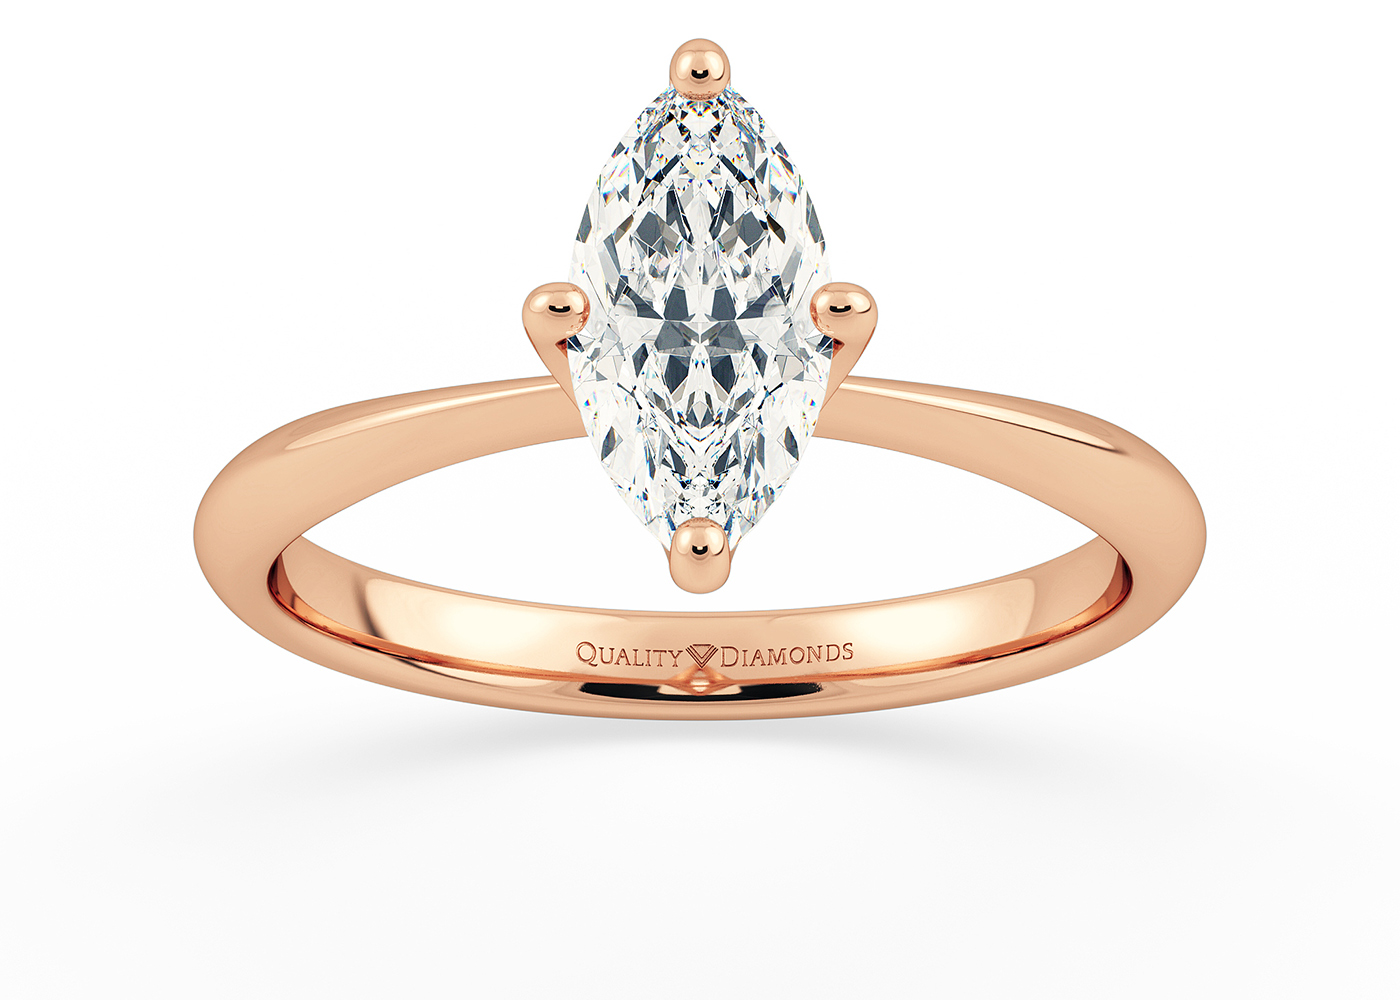 Half Carat Marquise Solitaire Diamond Engagement Ring in 18K Rose Gold